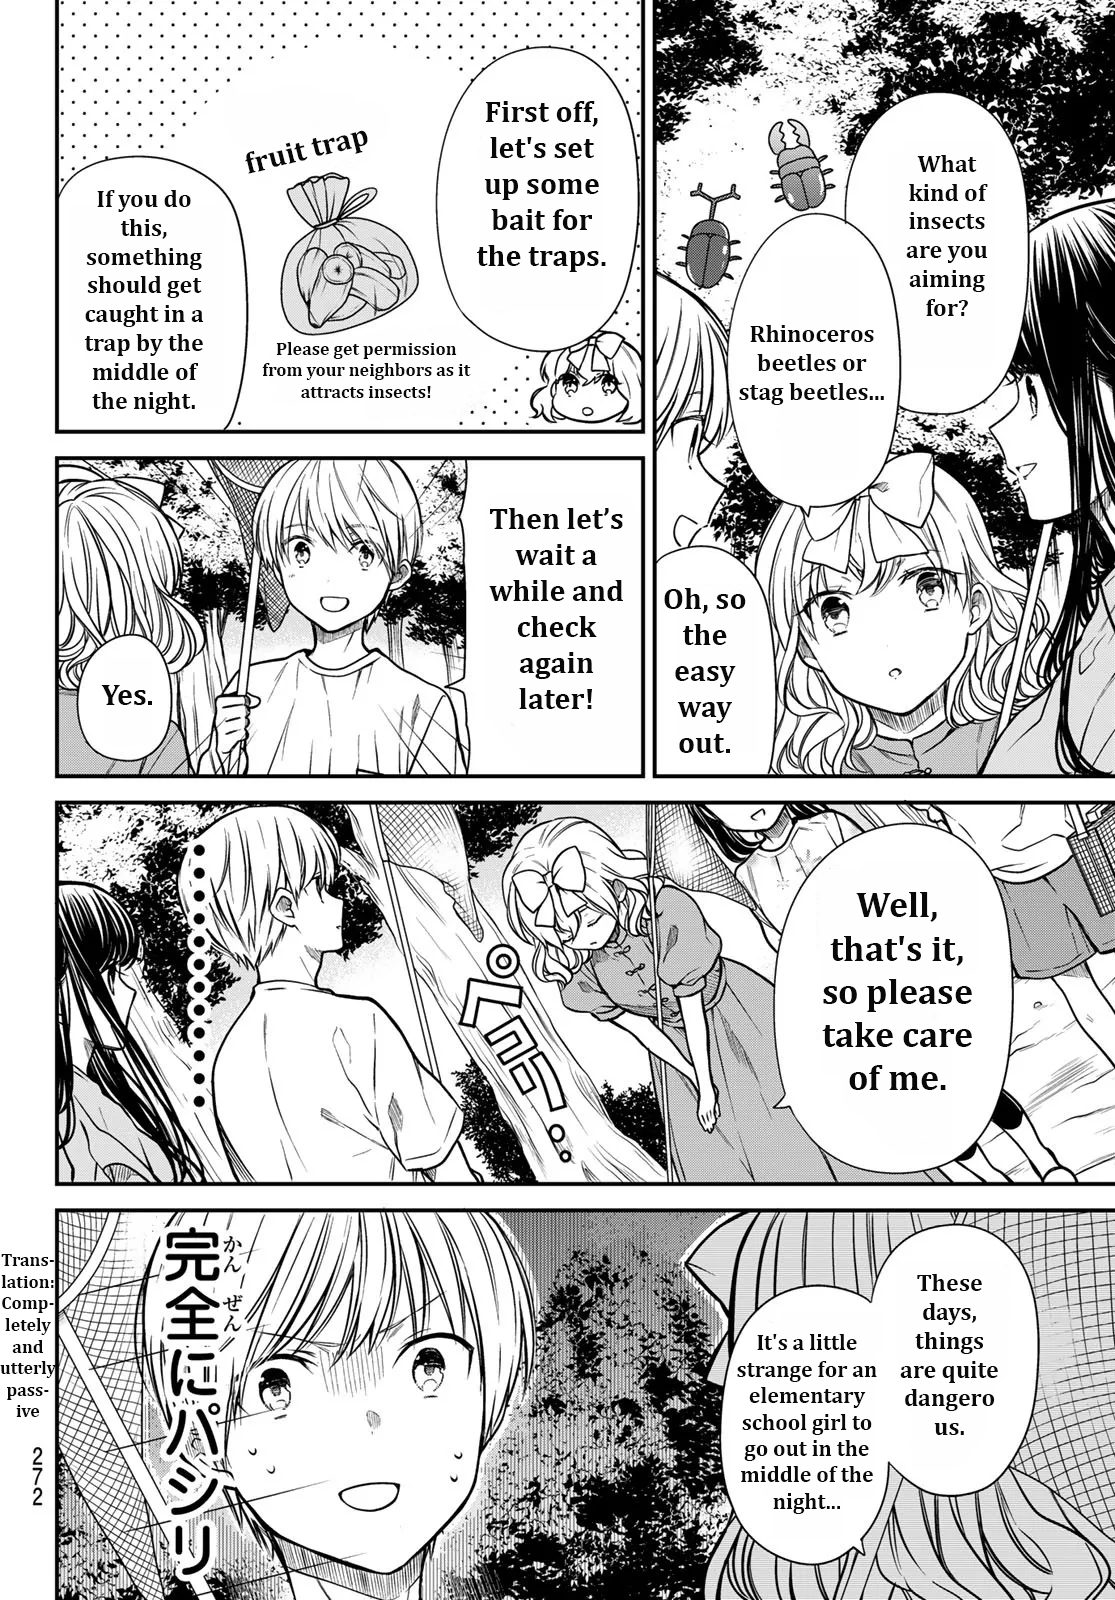 The Story Of An Onee-San Who Wants To Keep A High School Boy - Page 2